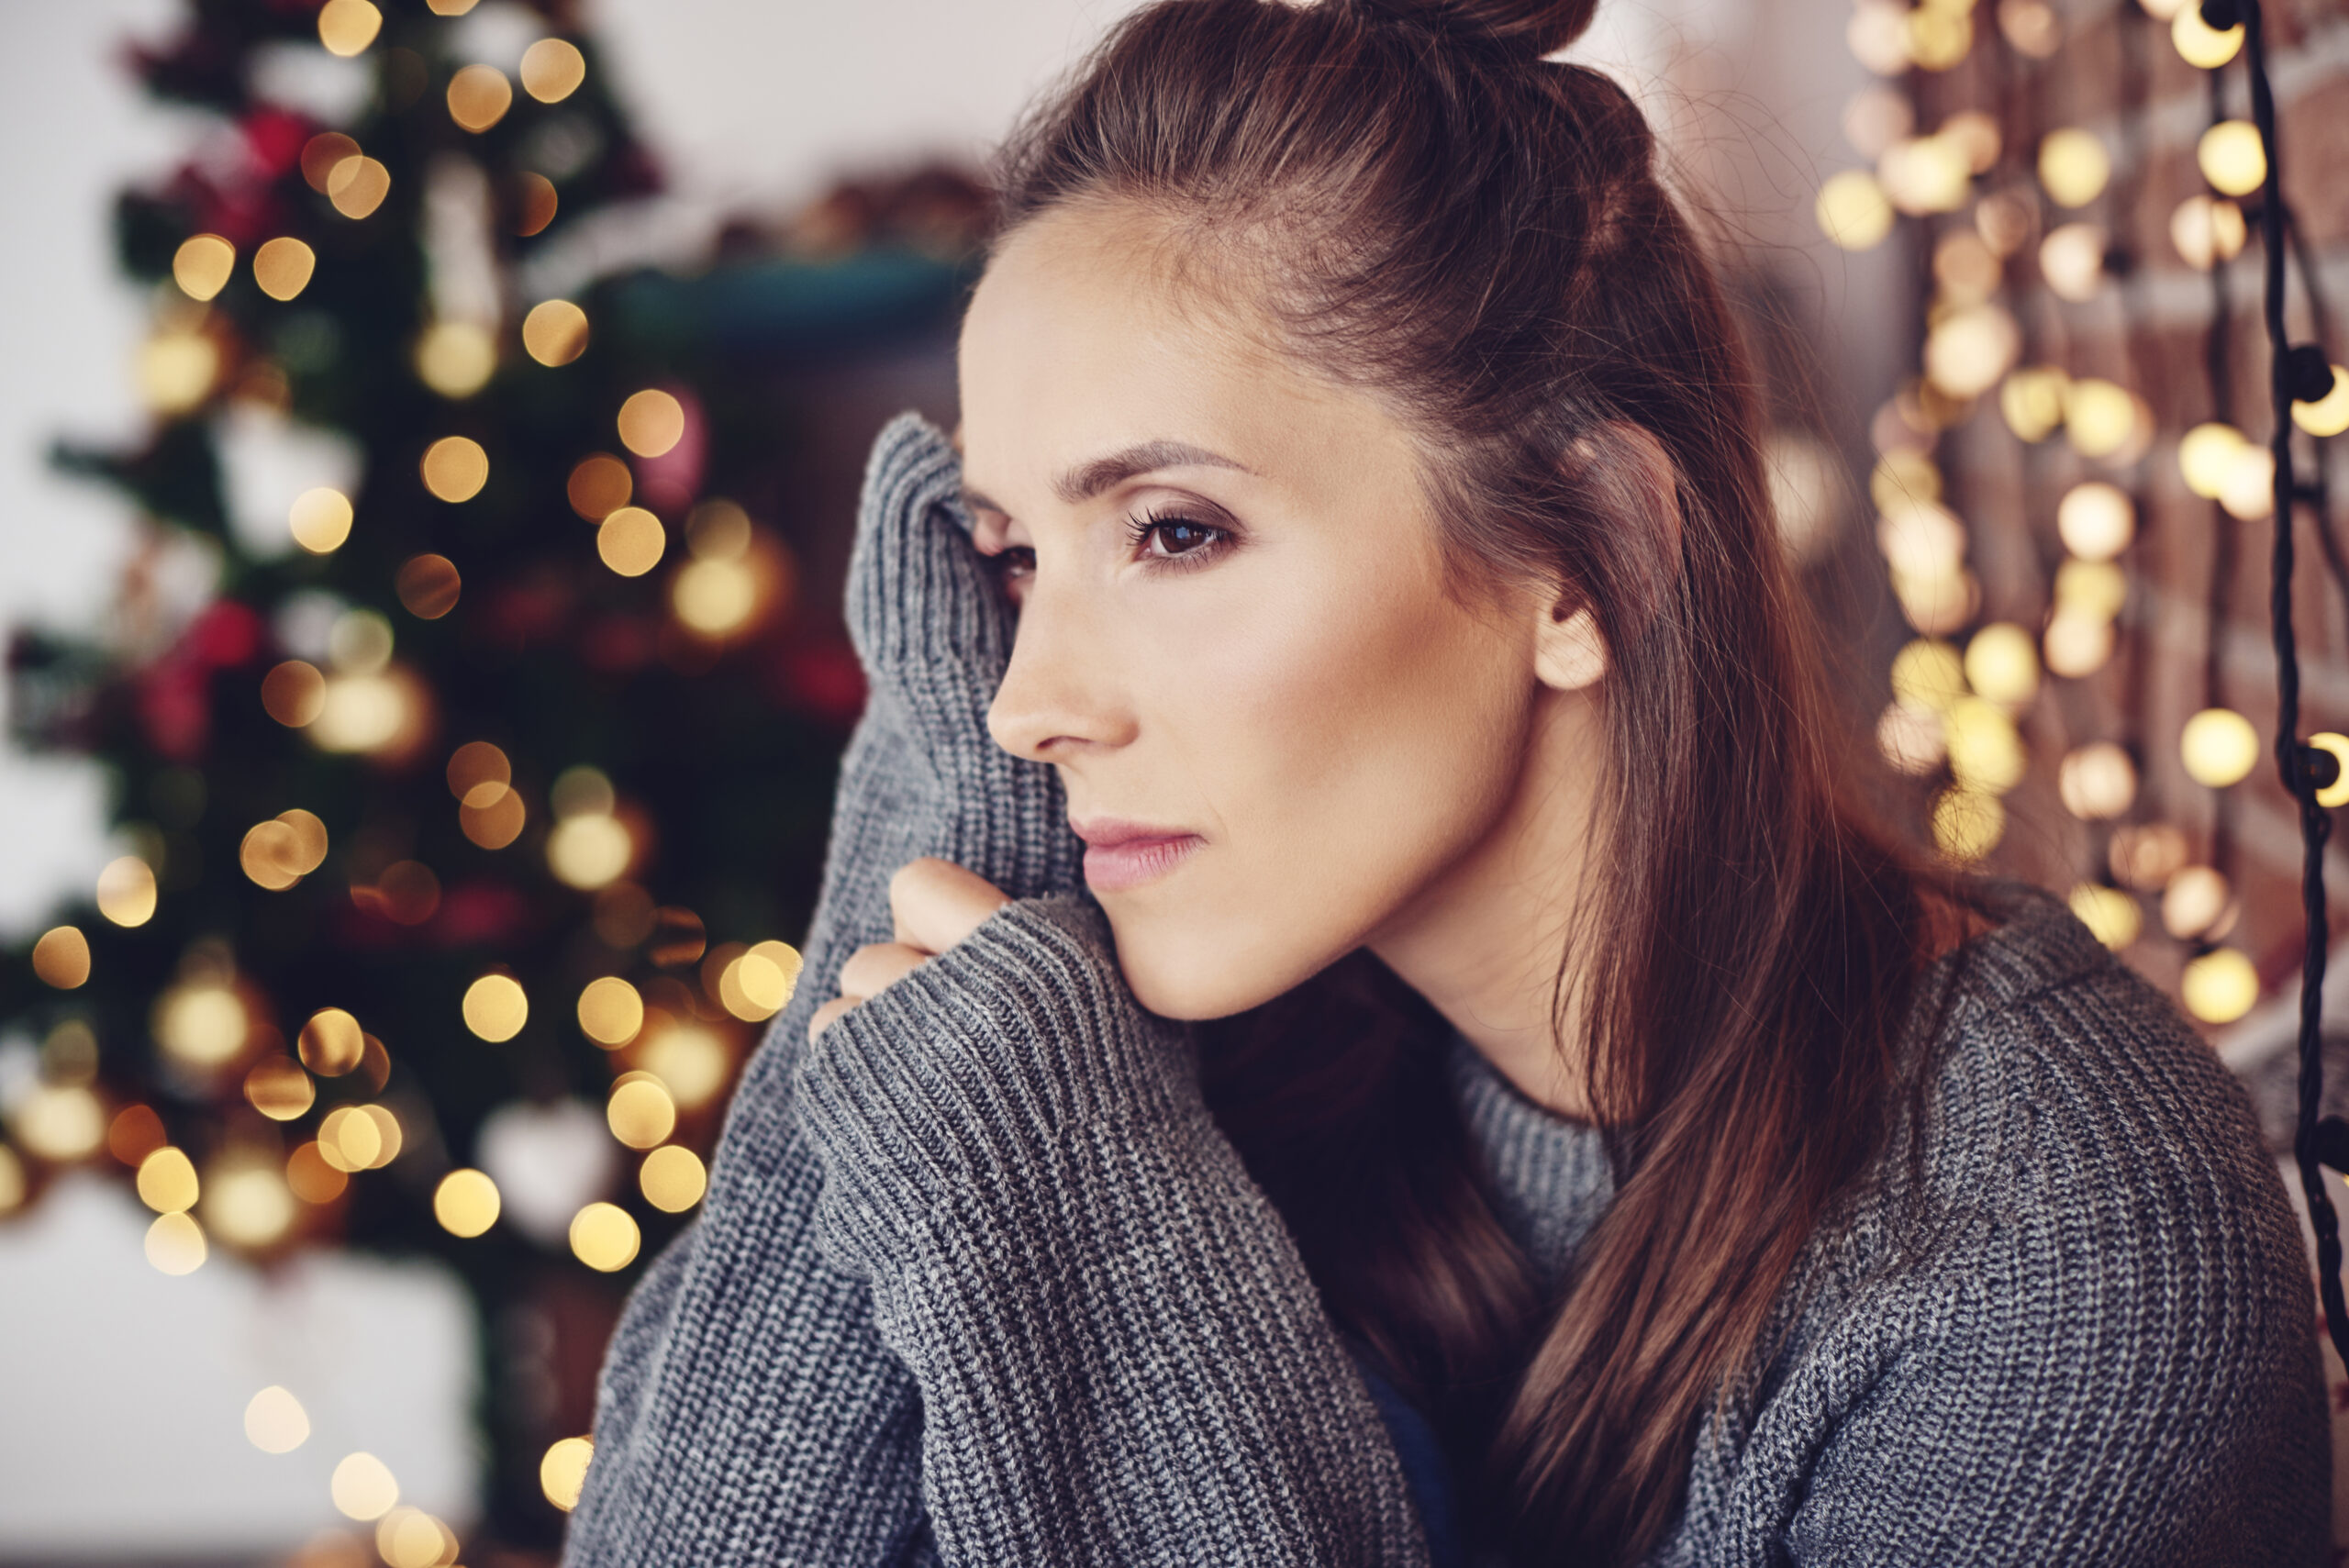 How To Cope with Grief During The Holidays